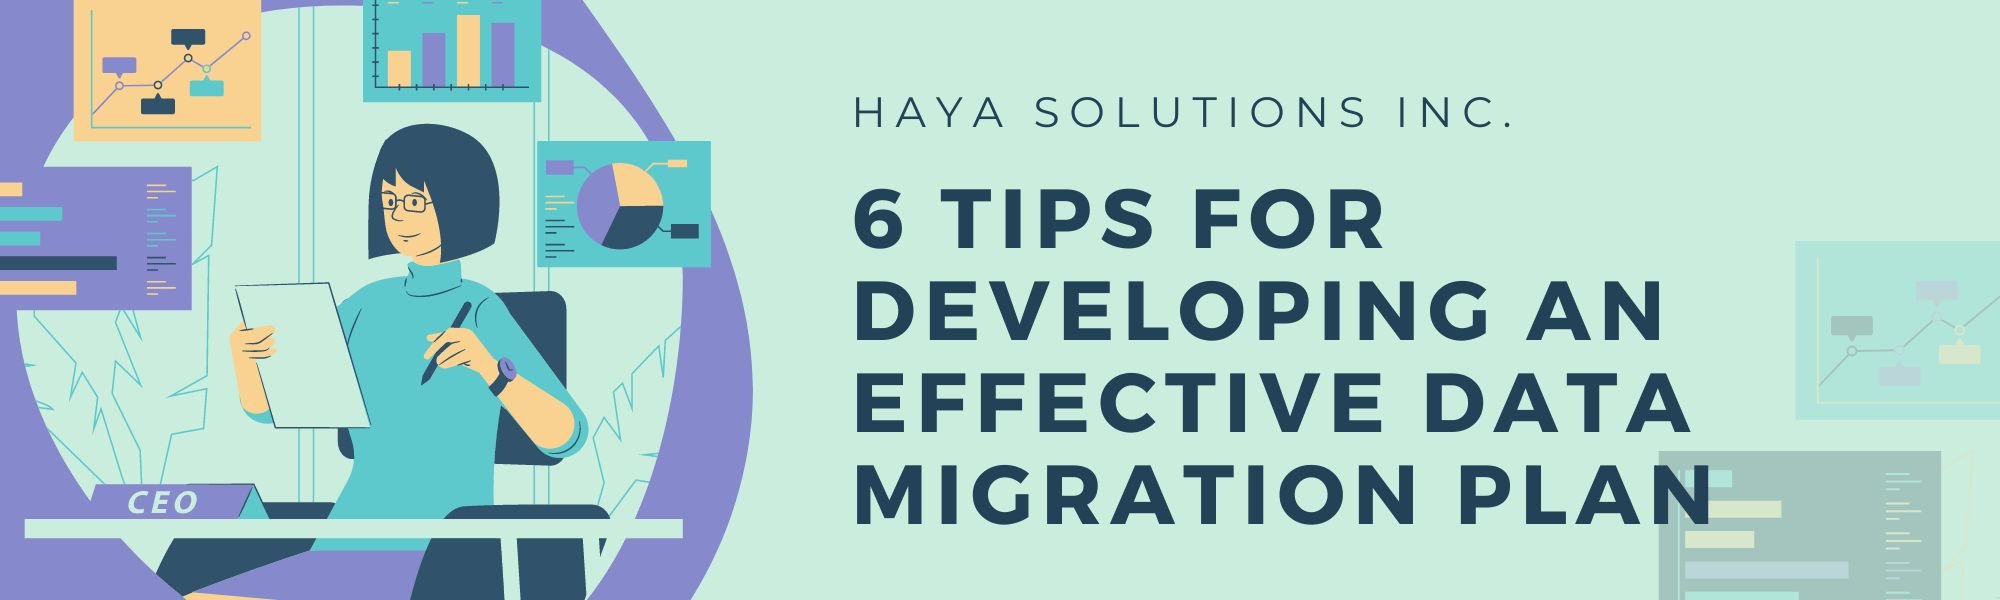 6 Tips for Developing an Effective Data Migration Plan